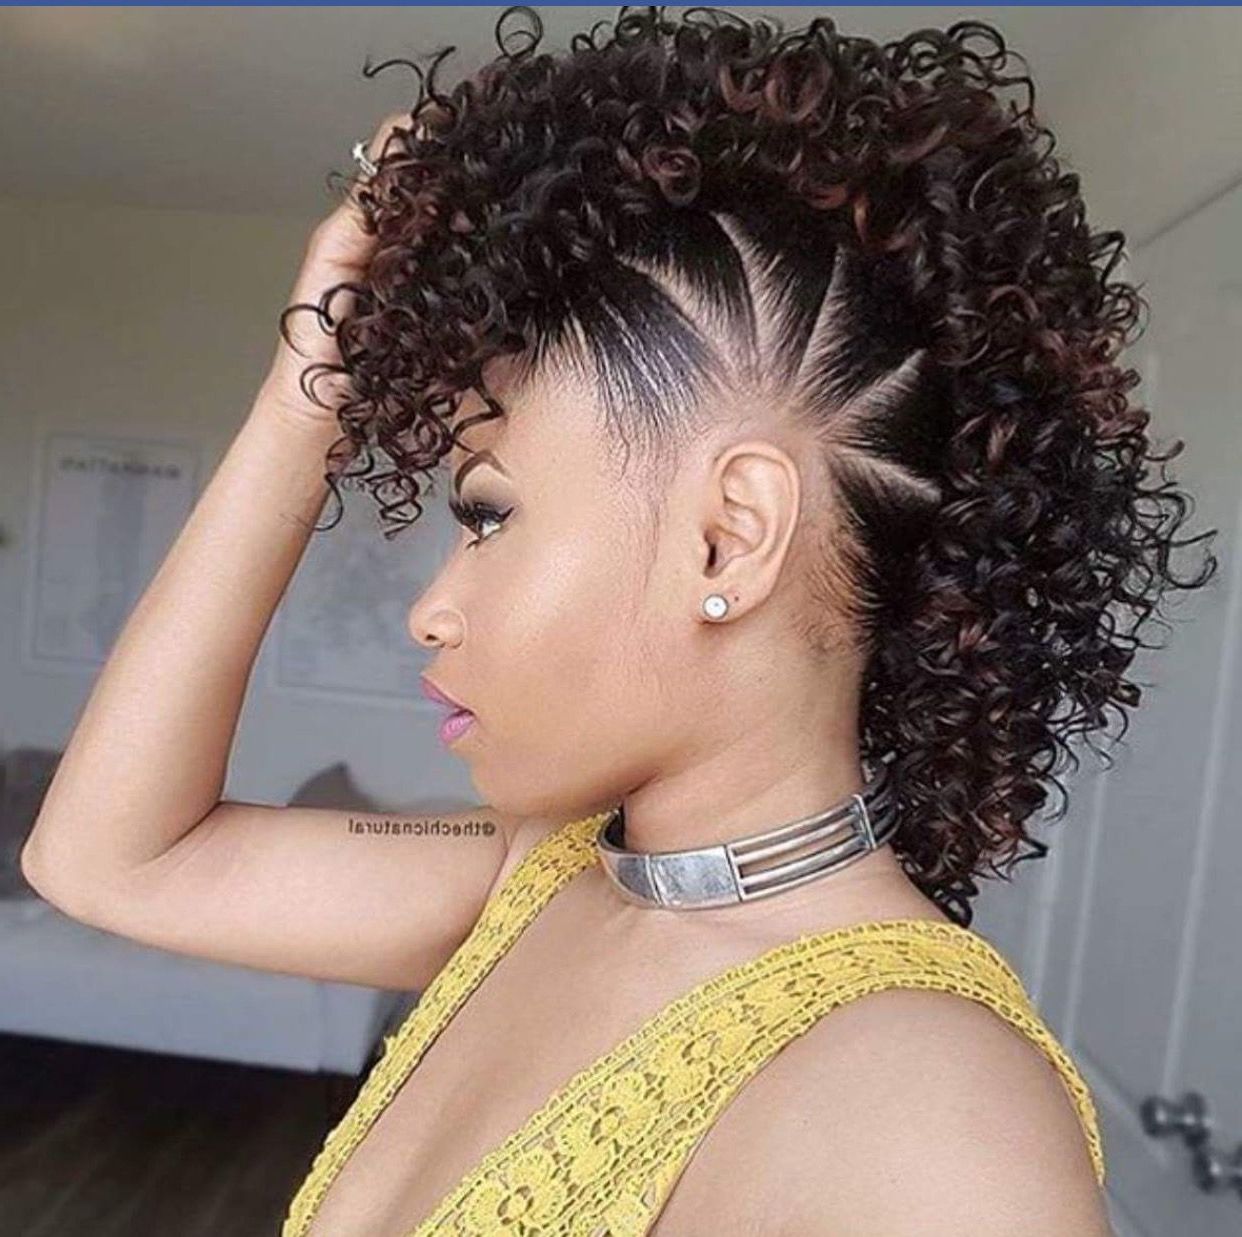 Hair Styles With Regard To Newest Cute And Curly Mohawk Hairstyles (View 4 of 20)